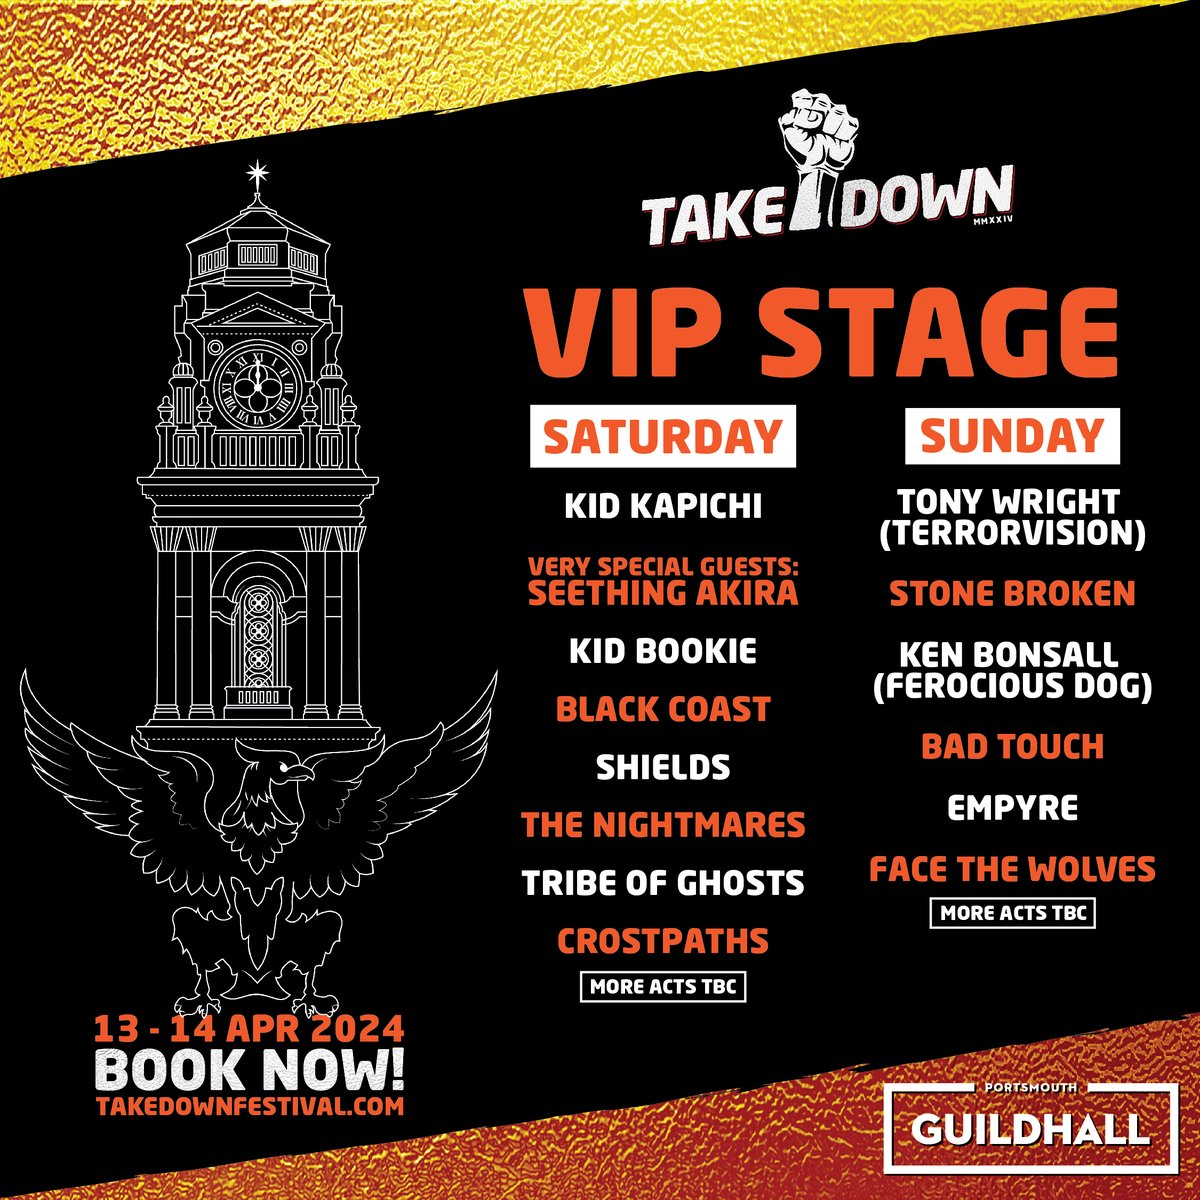 We won't just be performing once Takedown Festival 2024...

#takedownfestival2024 #MetalFestival #UKMetal #PortsmouthGuildhall #vip #acoustic #unplugged #rock #rockmusic